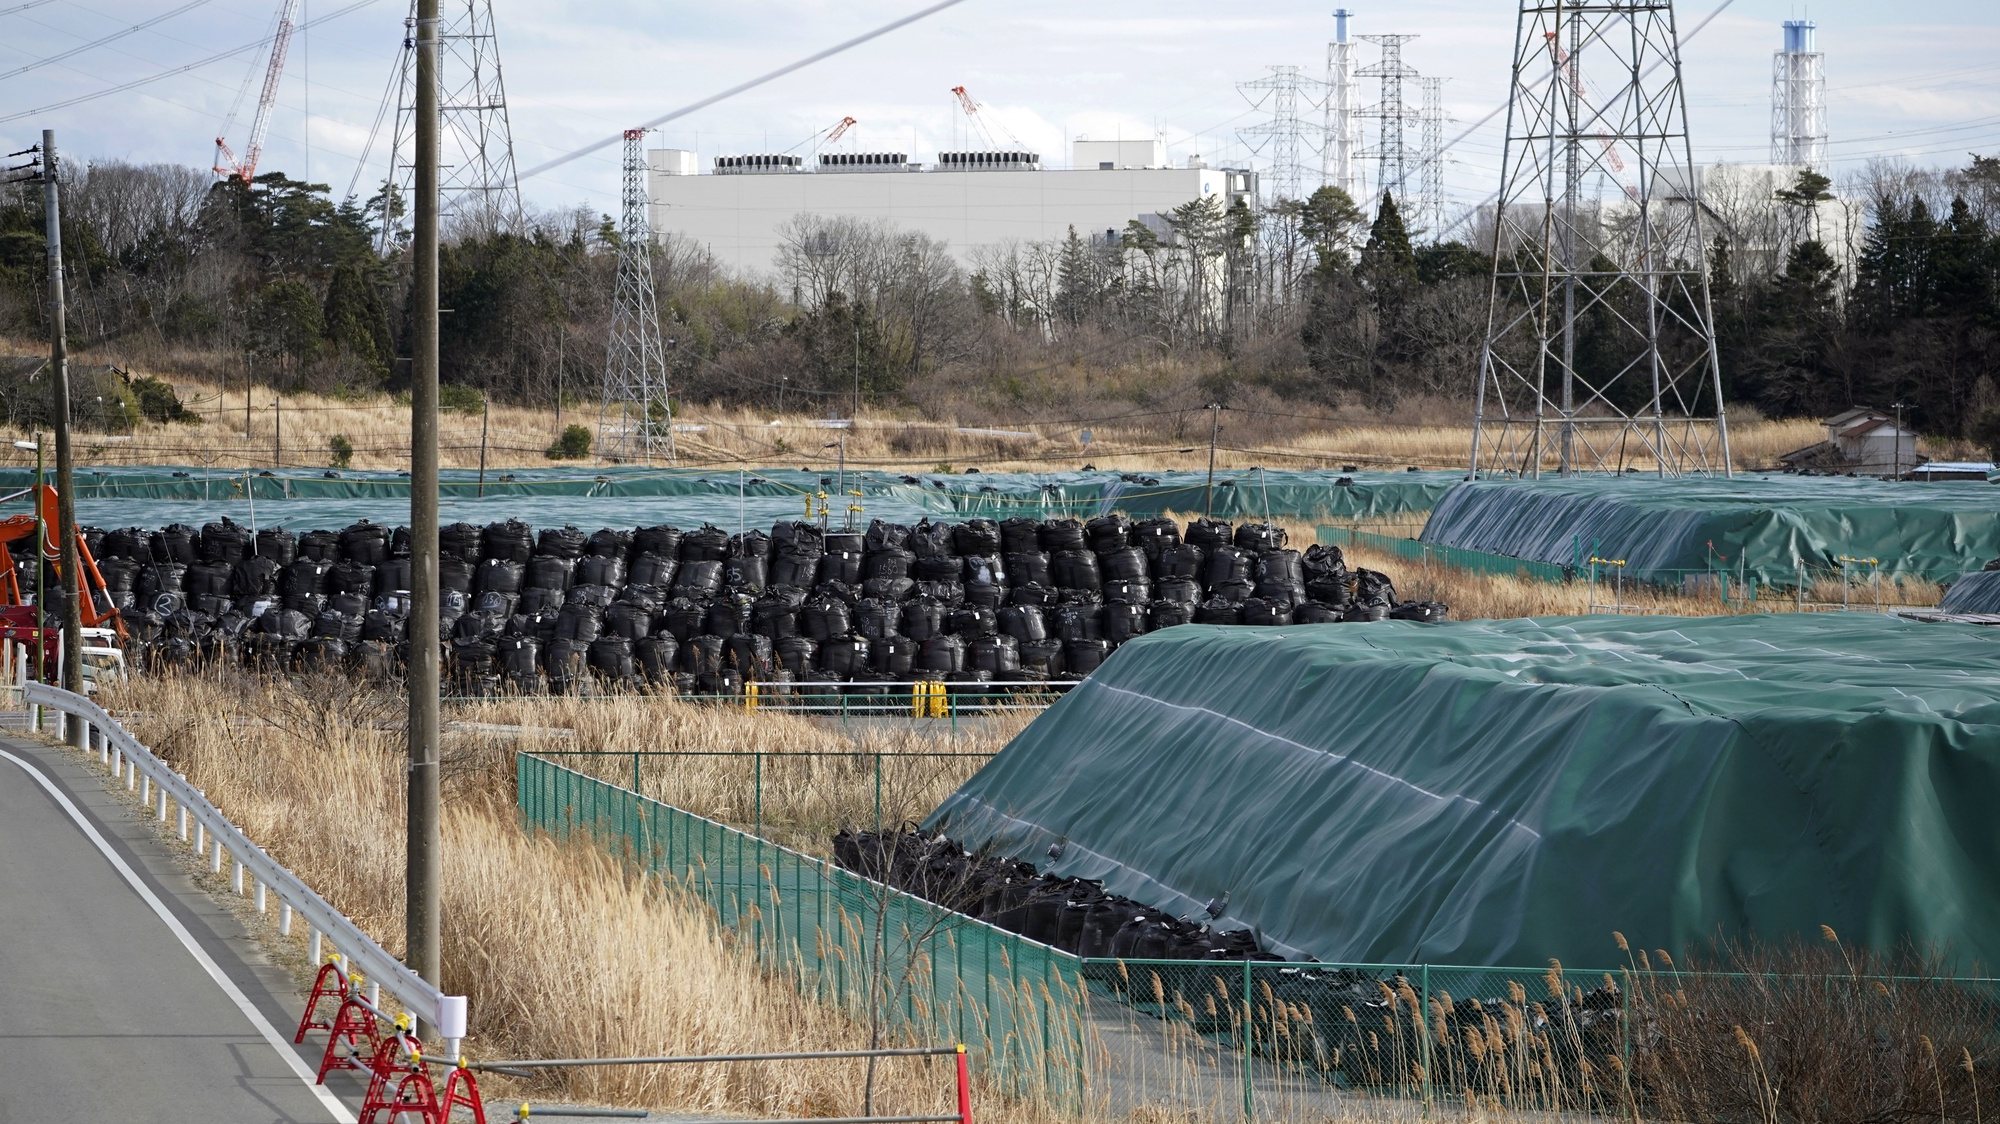 epa09053299 Bags containing contaminated soil and debris are pilled up near the crippled Fukushima Daiichi Nuclear Power Plant in Okuma, Fukushima prefecture, Japan, 17 February 2021 (issued 05 March 2021). More than 36,000 people who evacuated Fukushima after the nuclear accident are still away from their homes 10 years later, and most of them don&#039;t want to go back due to radiation concerns, which remains one of the main challenges in the decades-lasting reconstruction process.  EPA/FRANCK ROBICHON  ATTENTION: This Image is part of a PHOTO SET